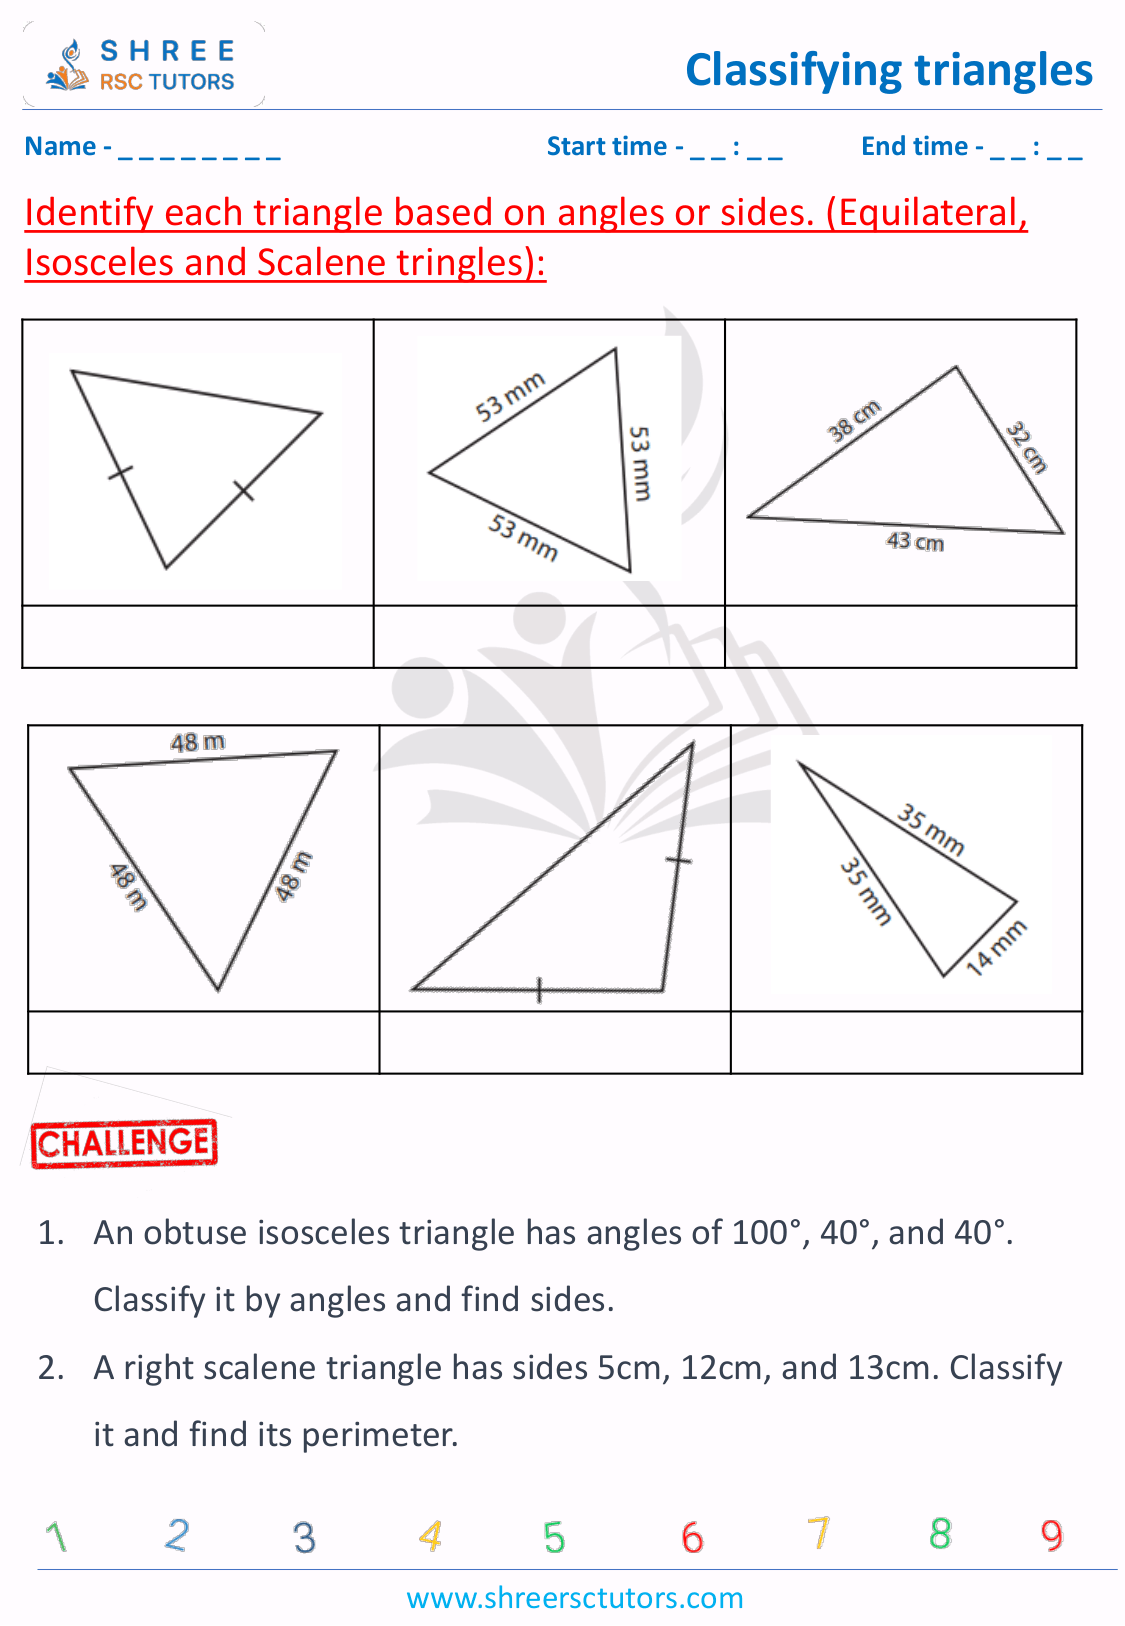 Equilateral Isosceles And Scalene Triangles Worksheets For Grade 7 Maths Shree Rsc Tutors 4649